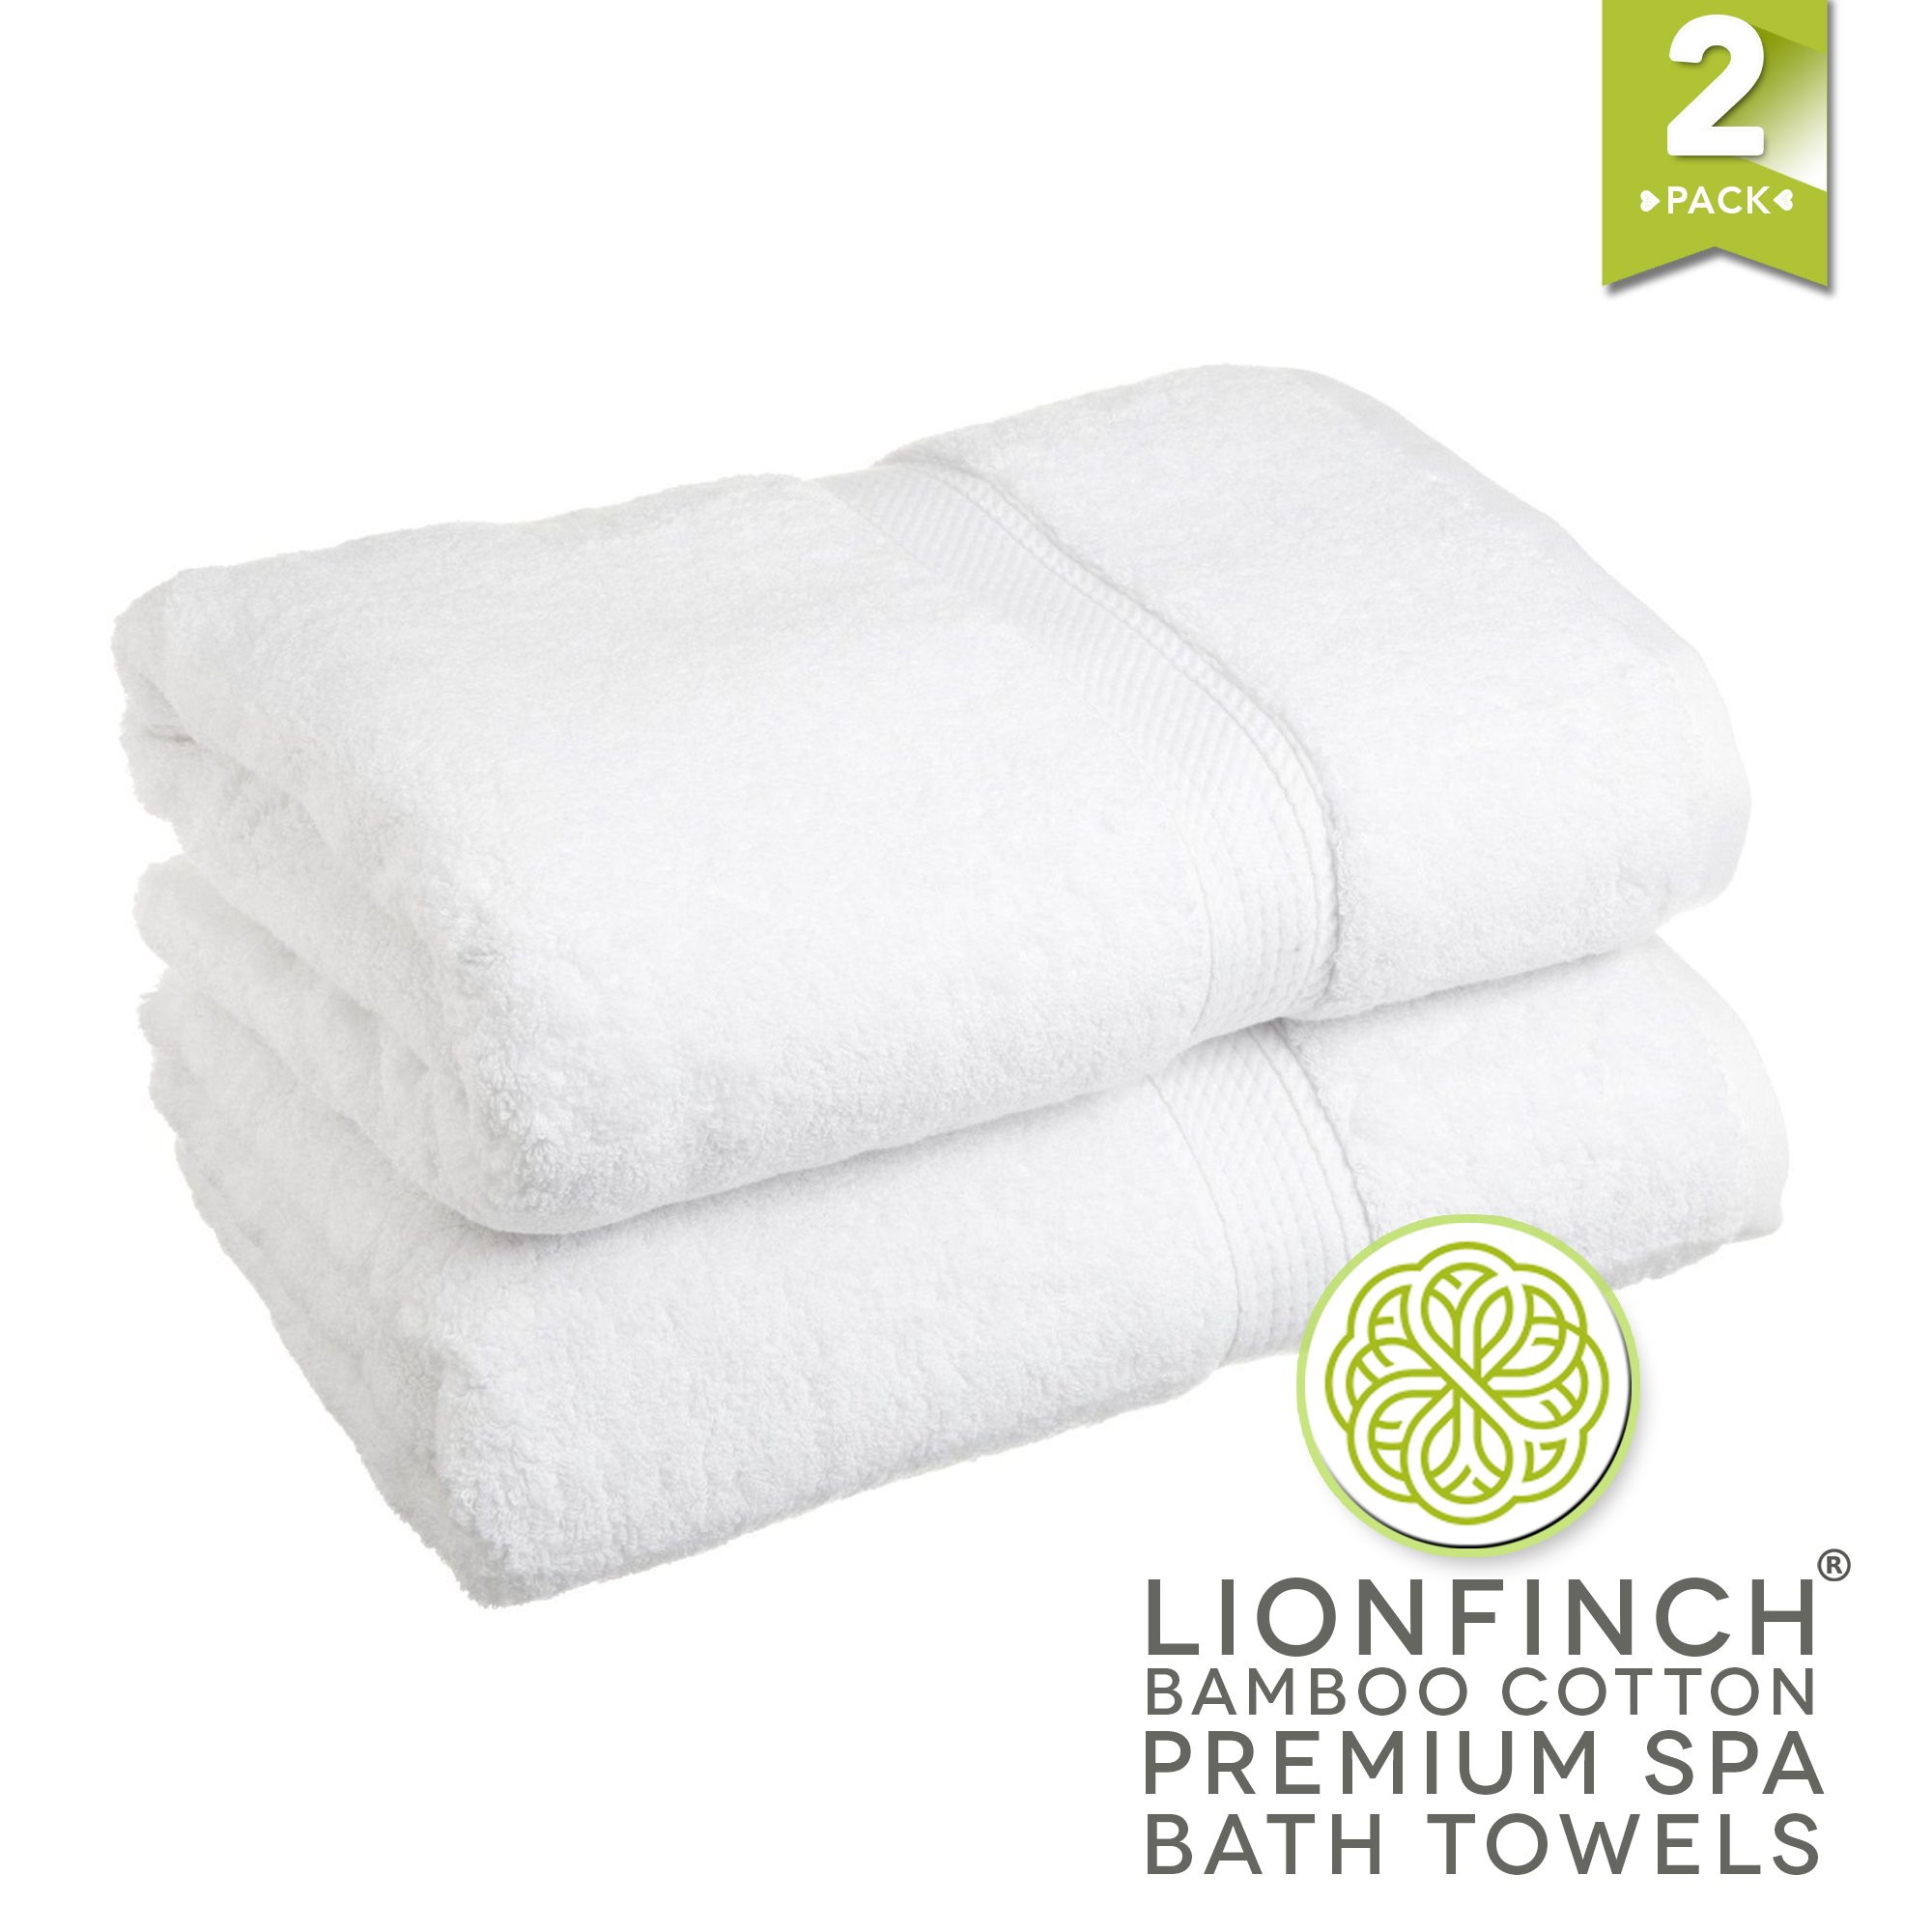 2 Pack Oversize Bamboo Cotton Bath Towels Premium Ultra Soft Absorbent Towel 